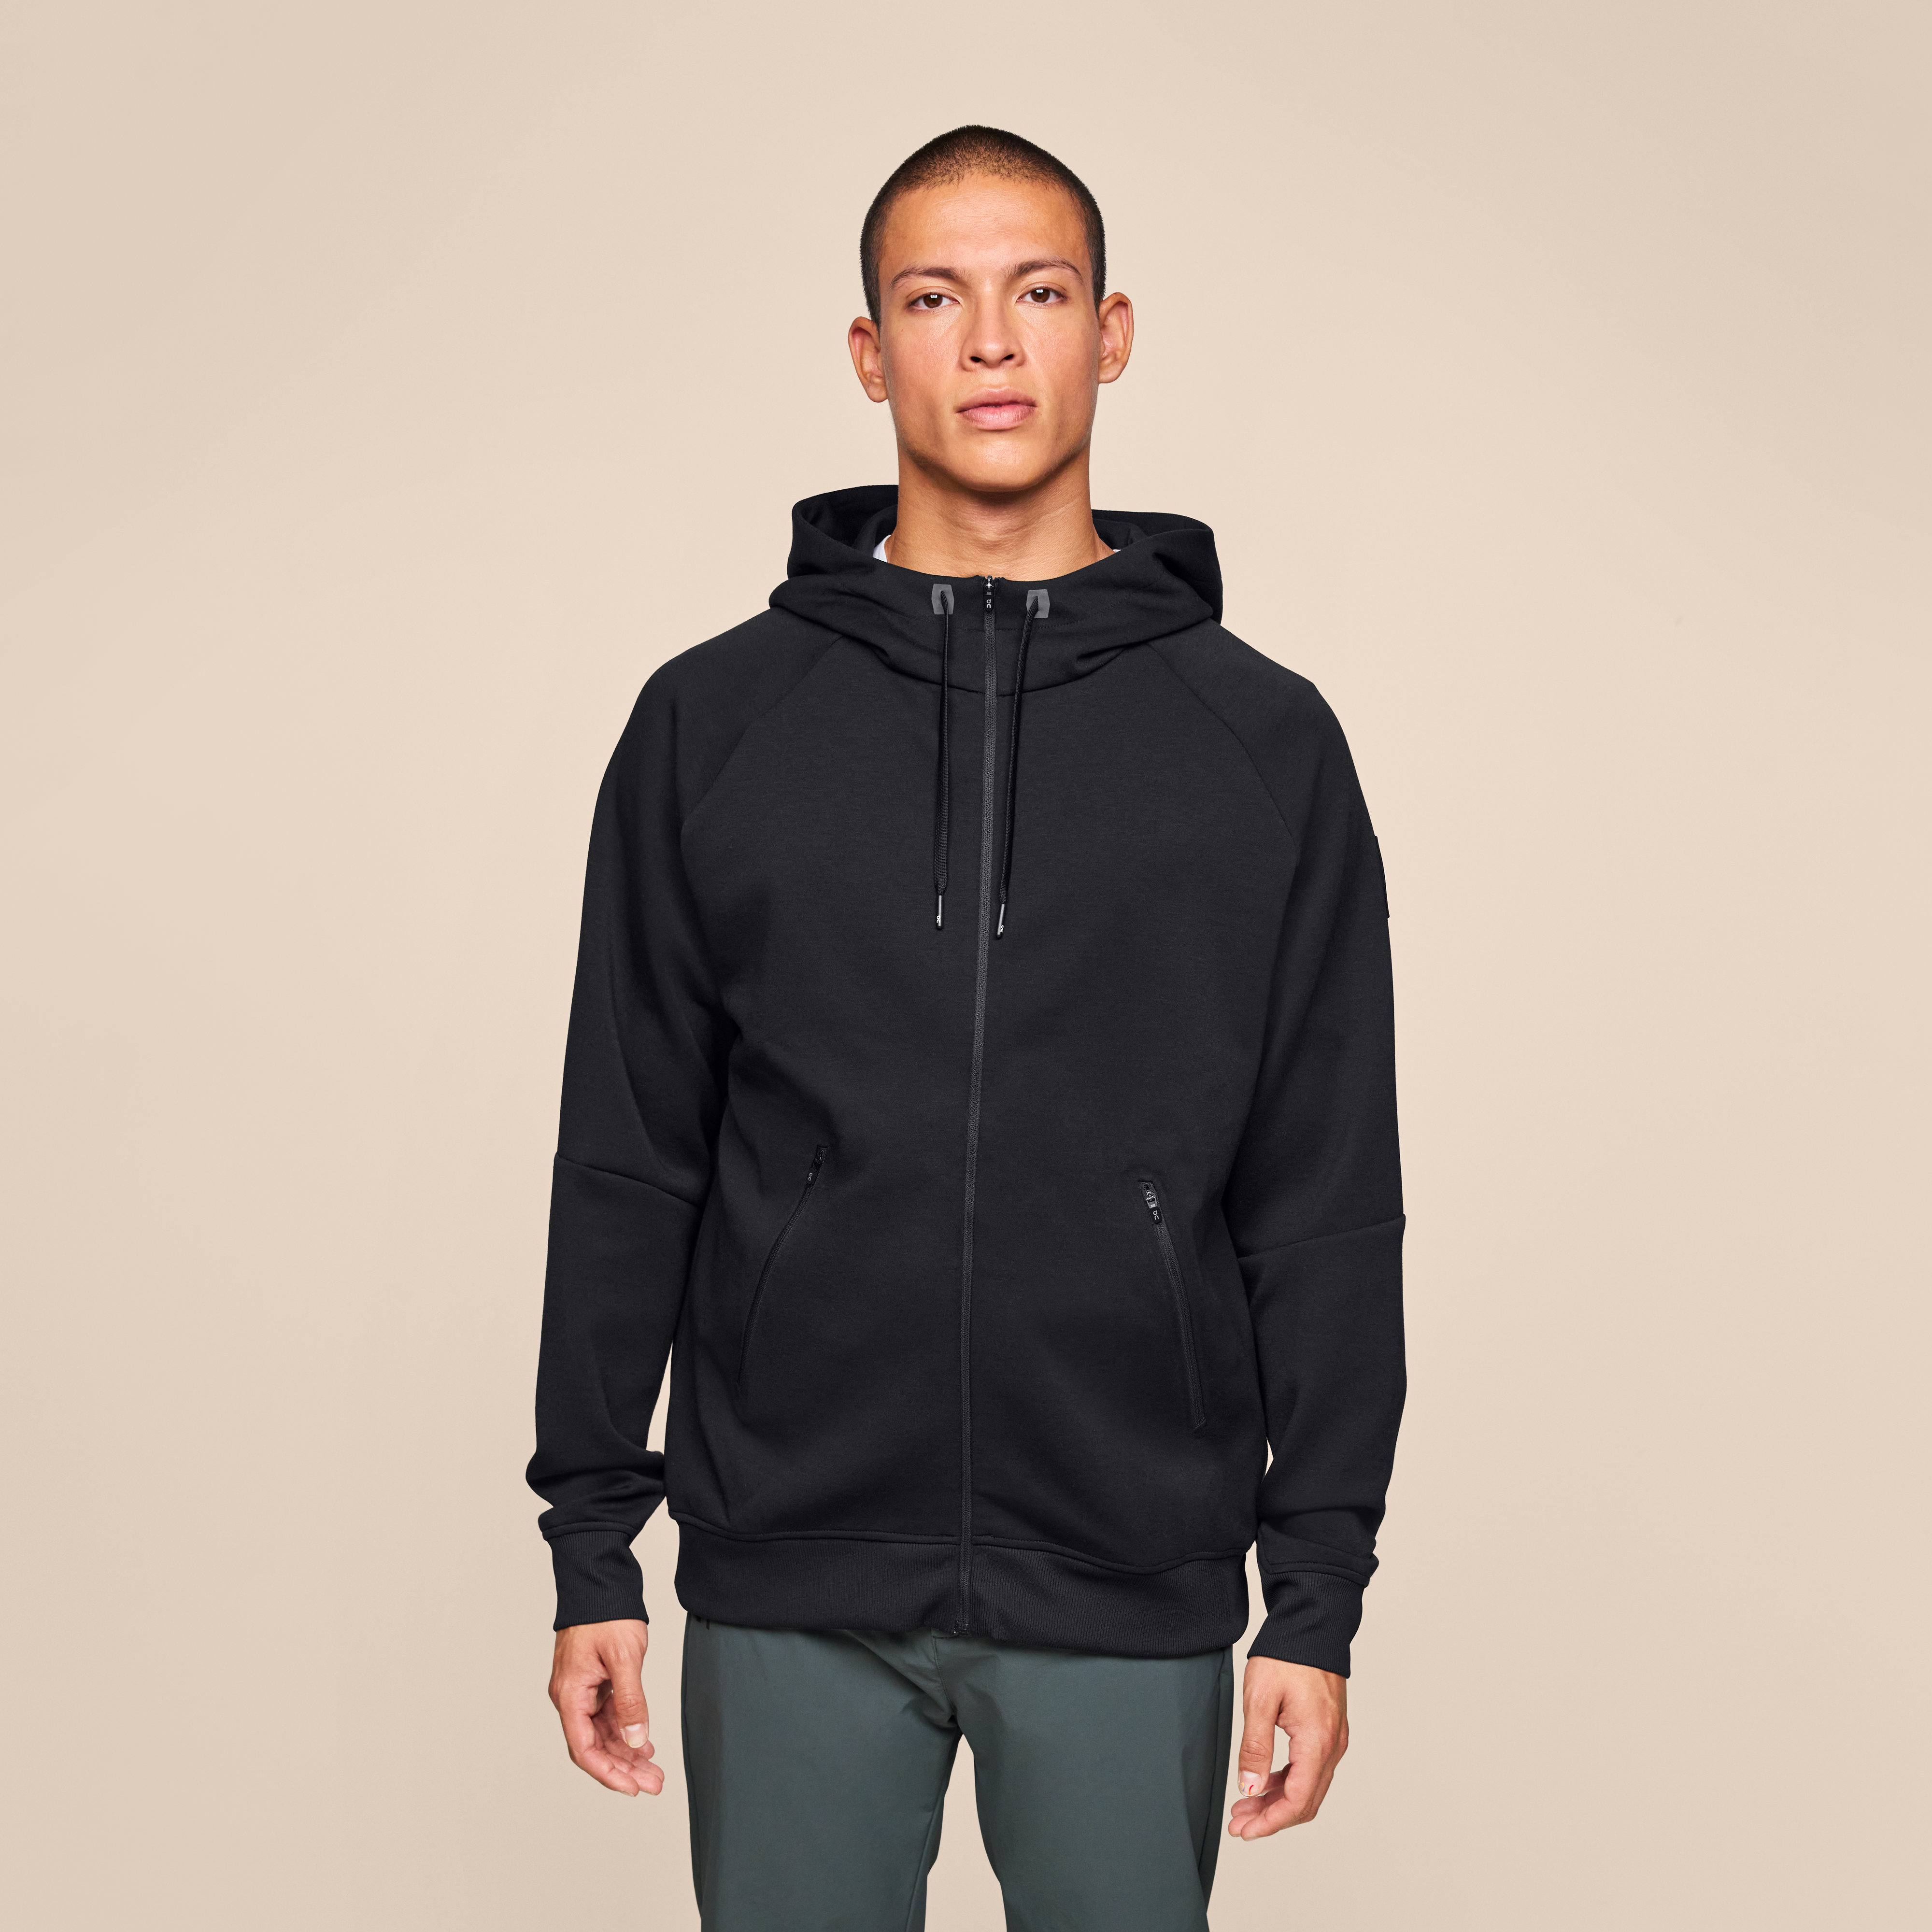 On Zipped Hoodie Black Men All-day comfort, pre and post workout, technical recycled fabric Hoodies and sweatshirts